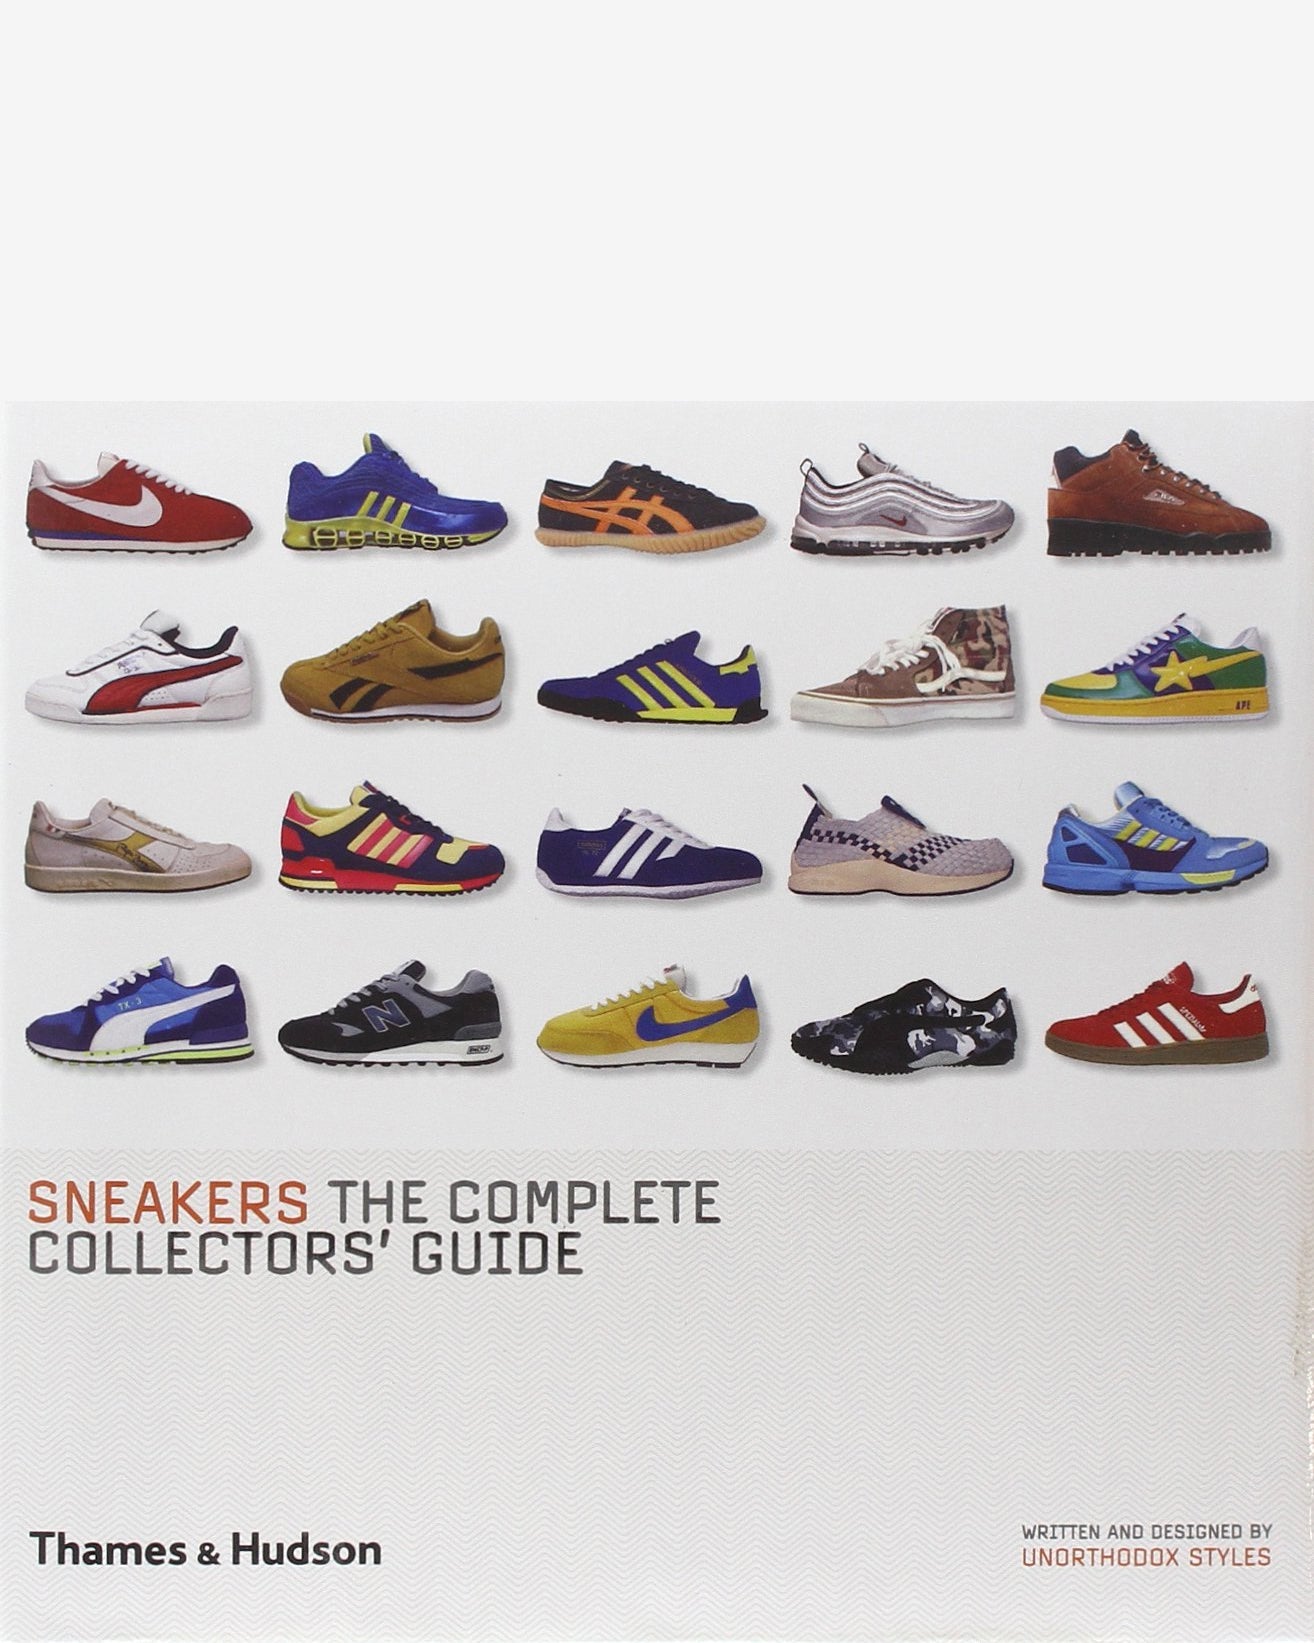 SNEAKERS: THE COMPLETE COLLECTORS' GUIDE